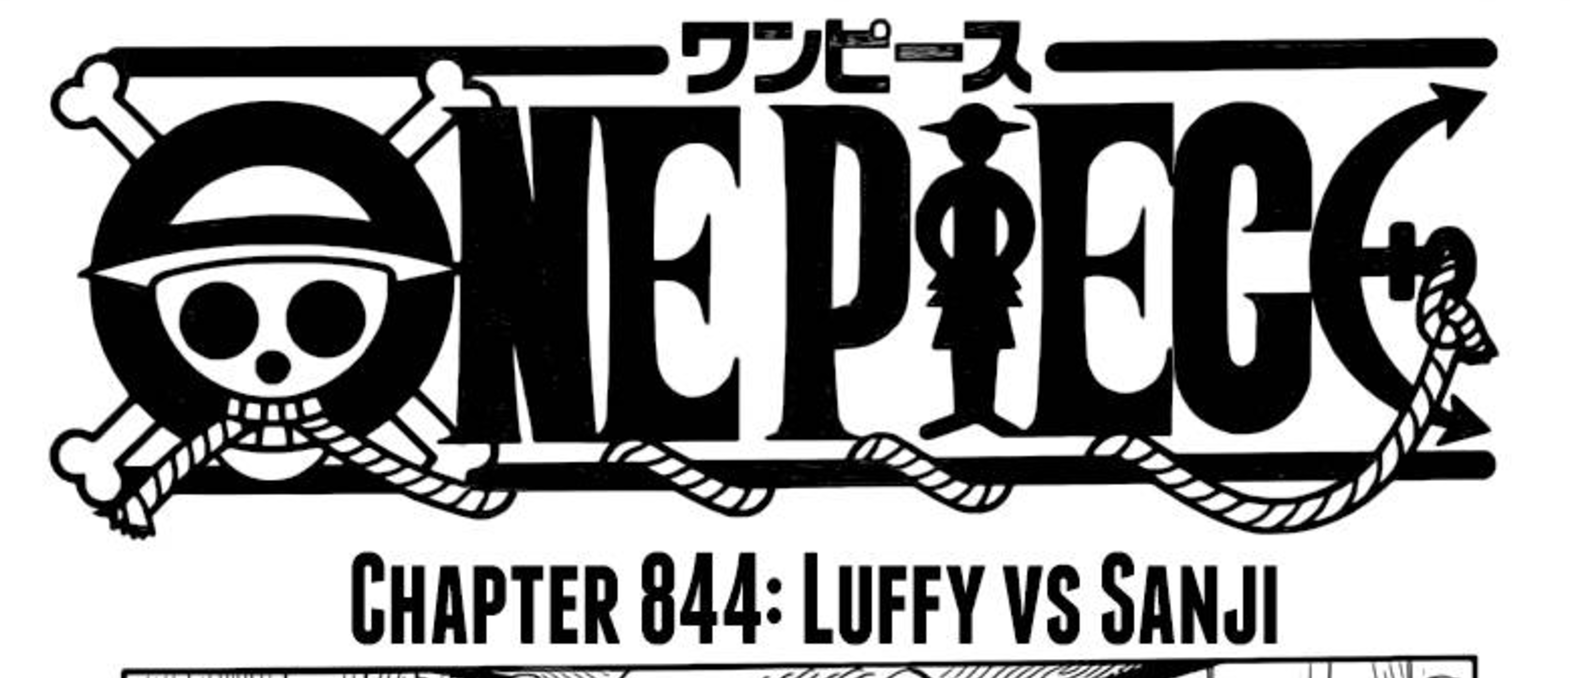 One Piece Chapter 844 Review The Illest Villains